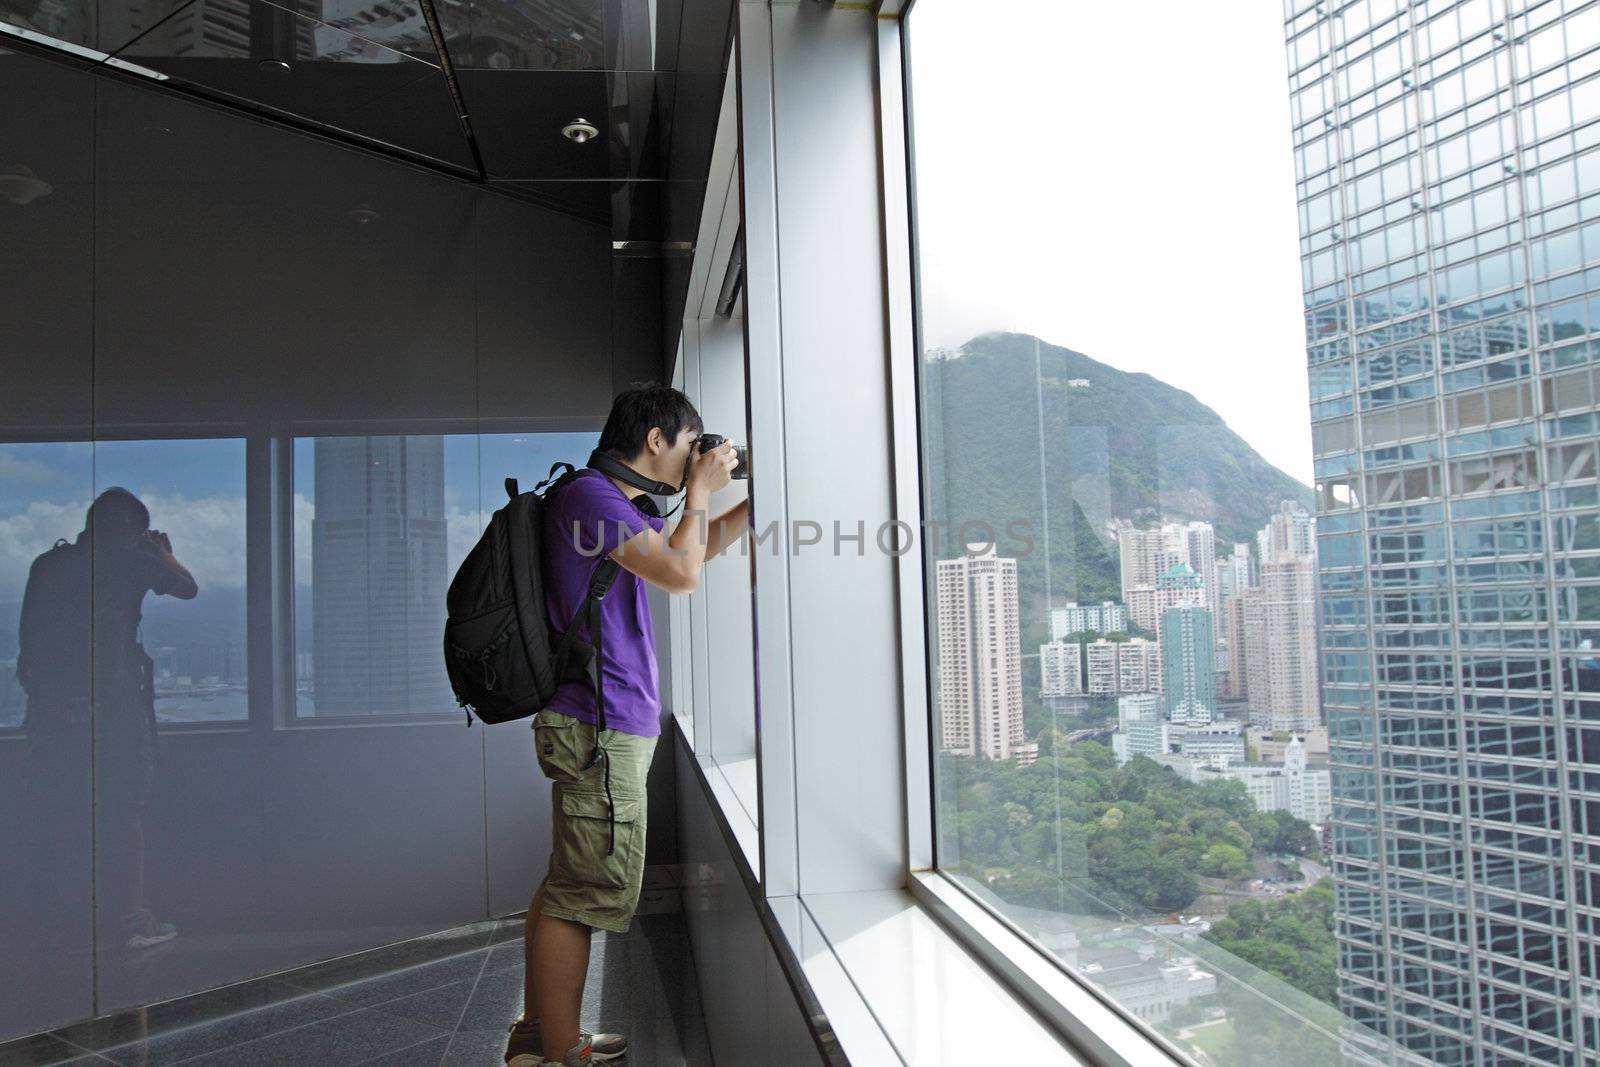 photographer takes a photo of the landscape indoor